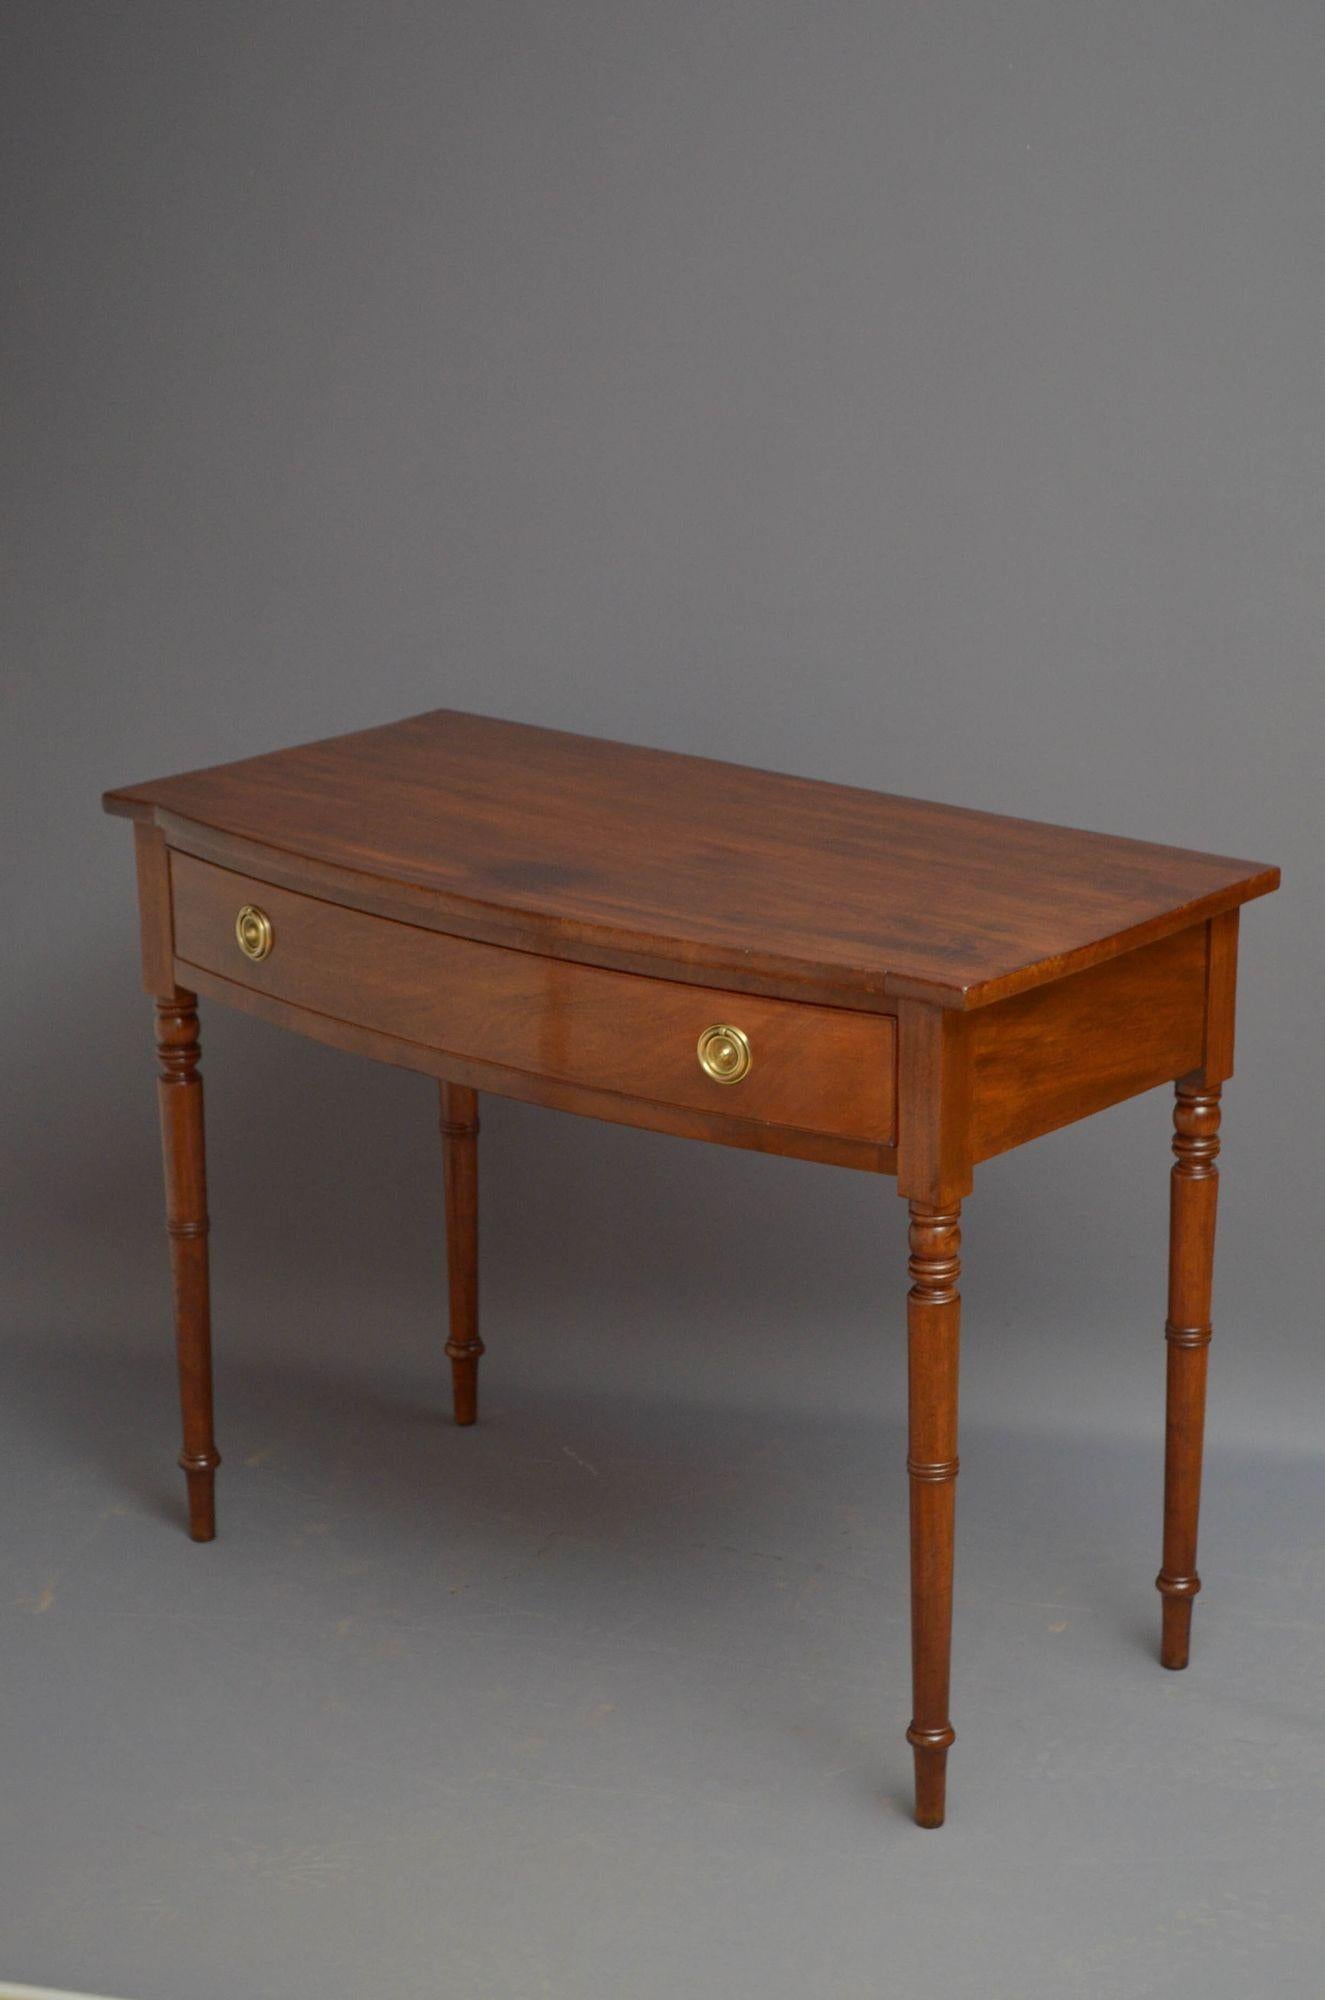 Sn5259 Elegant Regency mahogany dressing table of bow fronted outline, having figured mahogany top and cockbeaded drawer fitted with brass handles, standing on turned and ringed tapered legs. This antique writing or side table retains its original